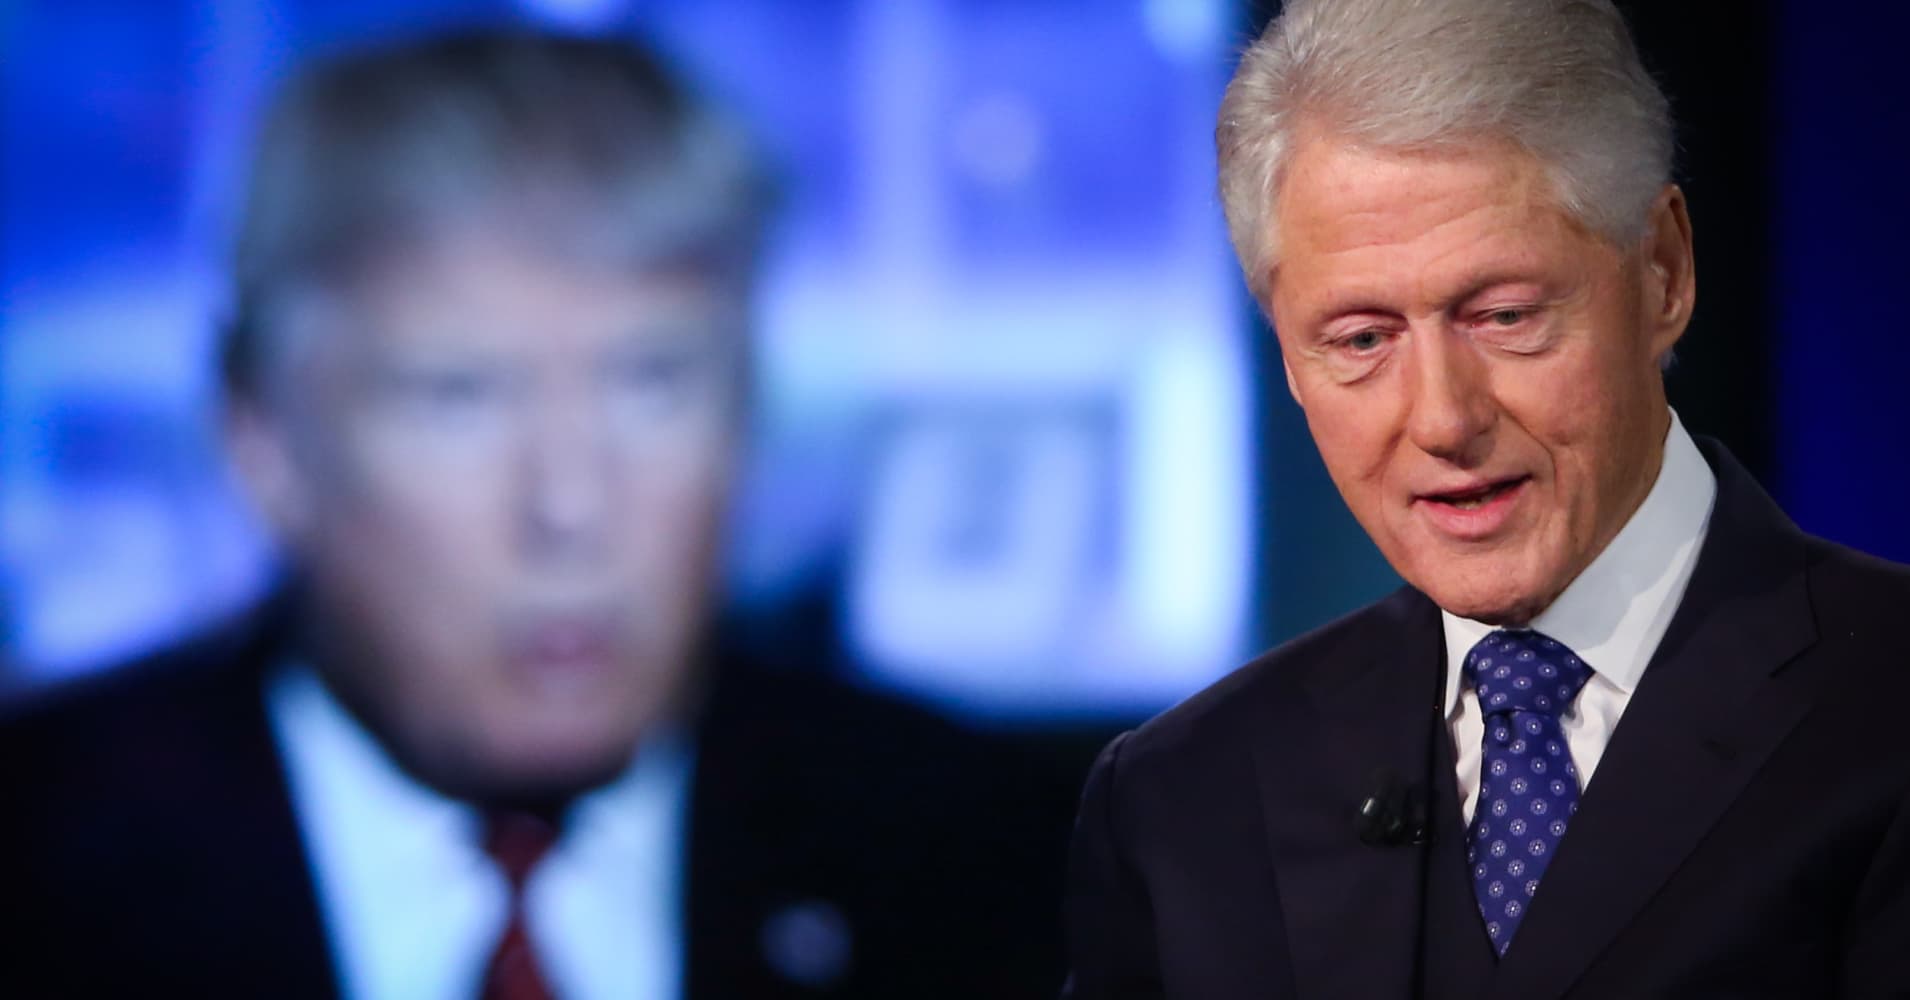 Trump could learn something about crisis management from Bill Clinton, says ex-Clinton ...1910 x 1000